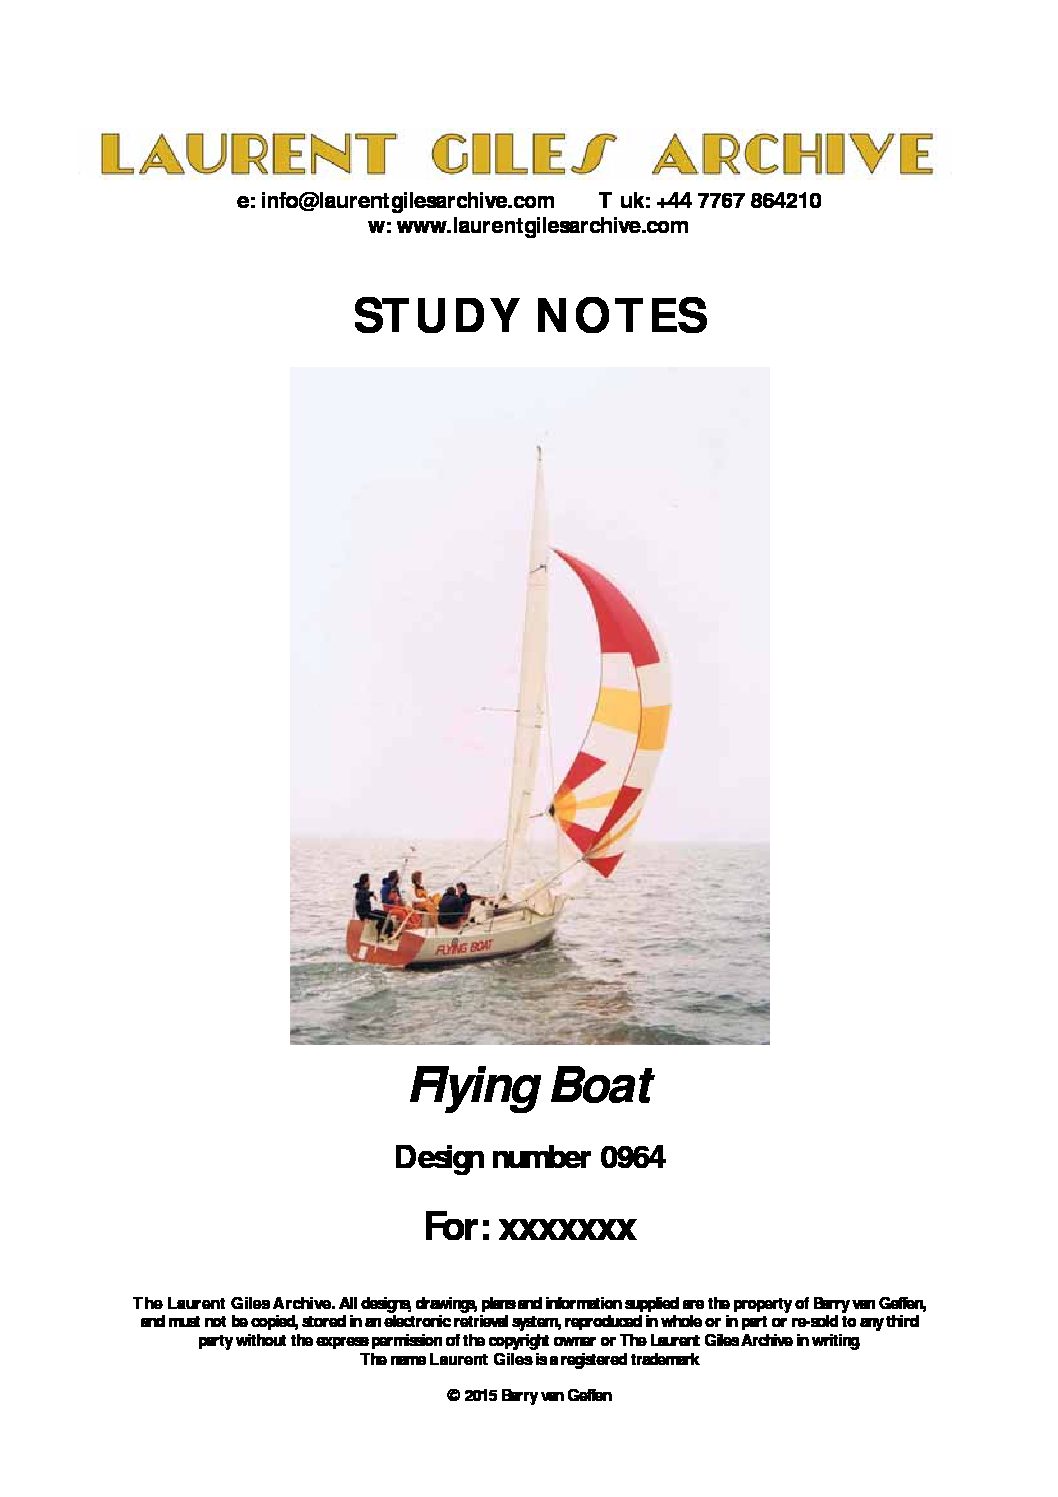 0965 Flying Boat front page 2015